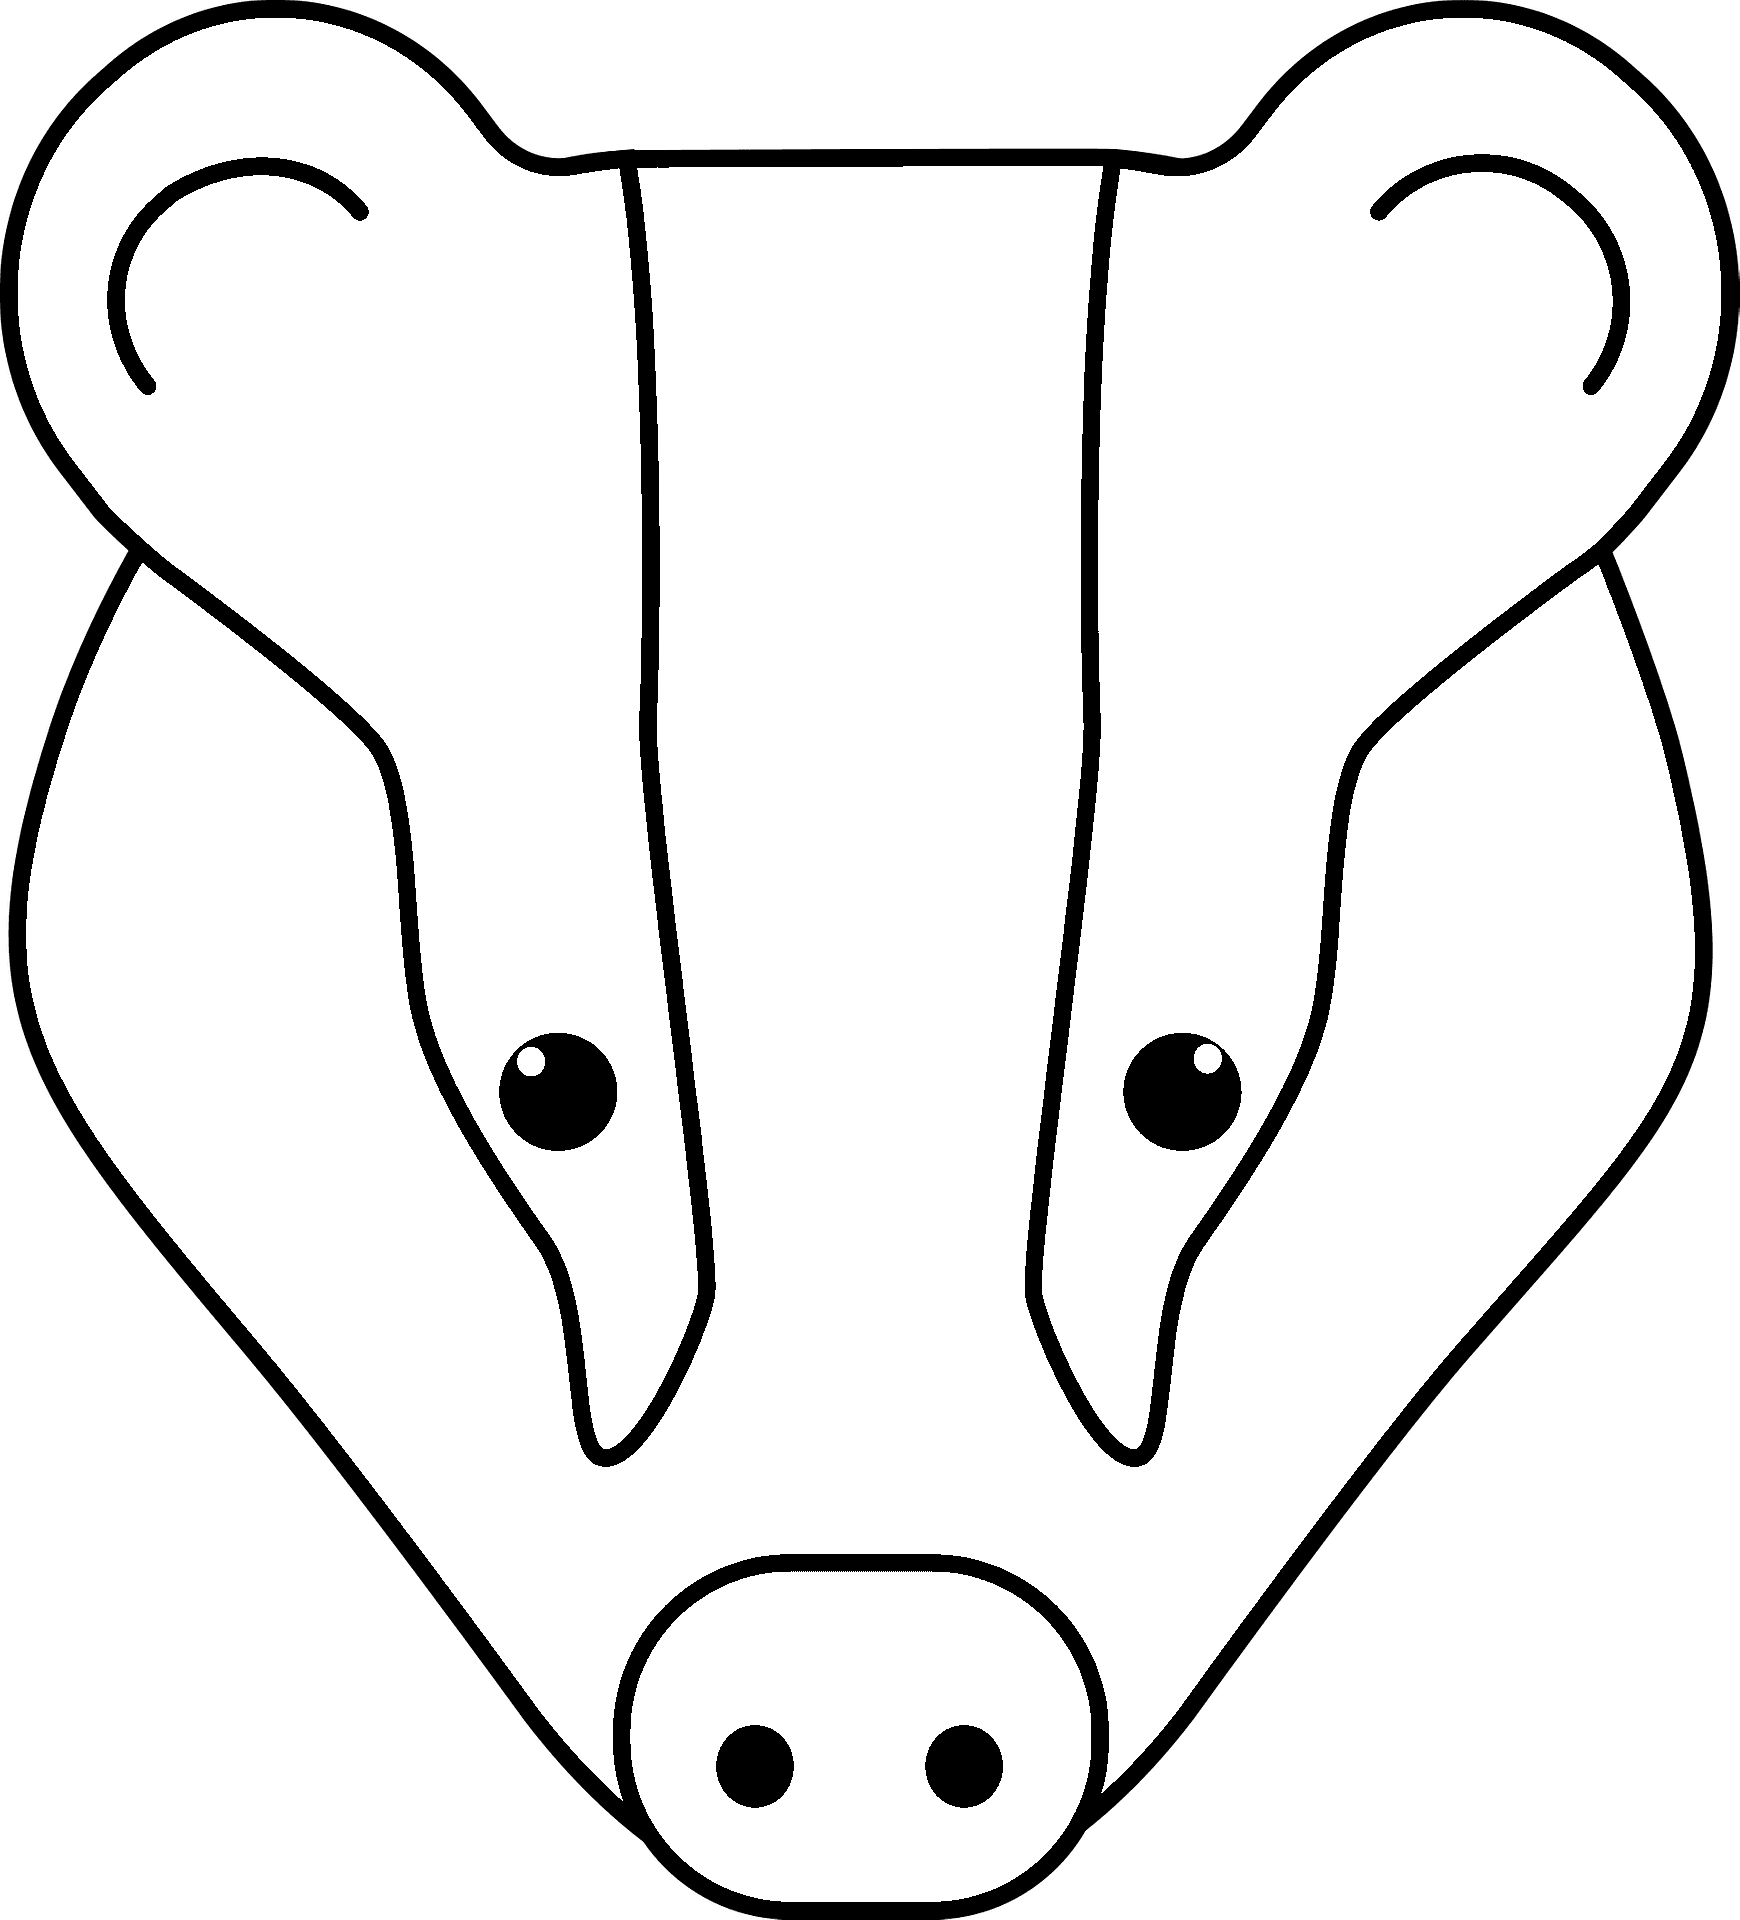 Coloring page of a badger (Meles meles)